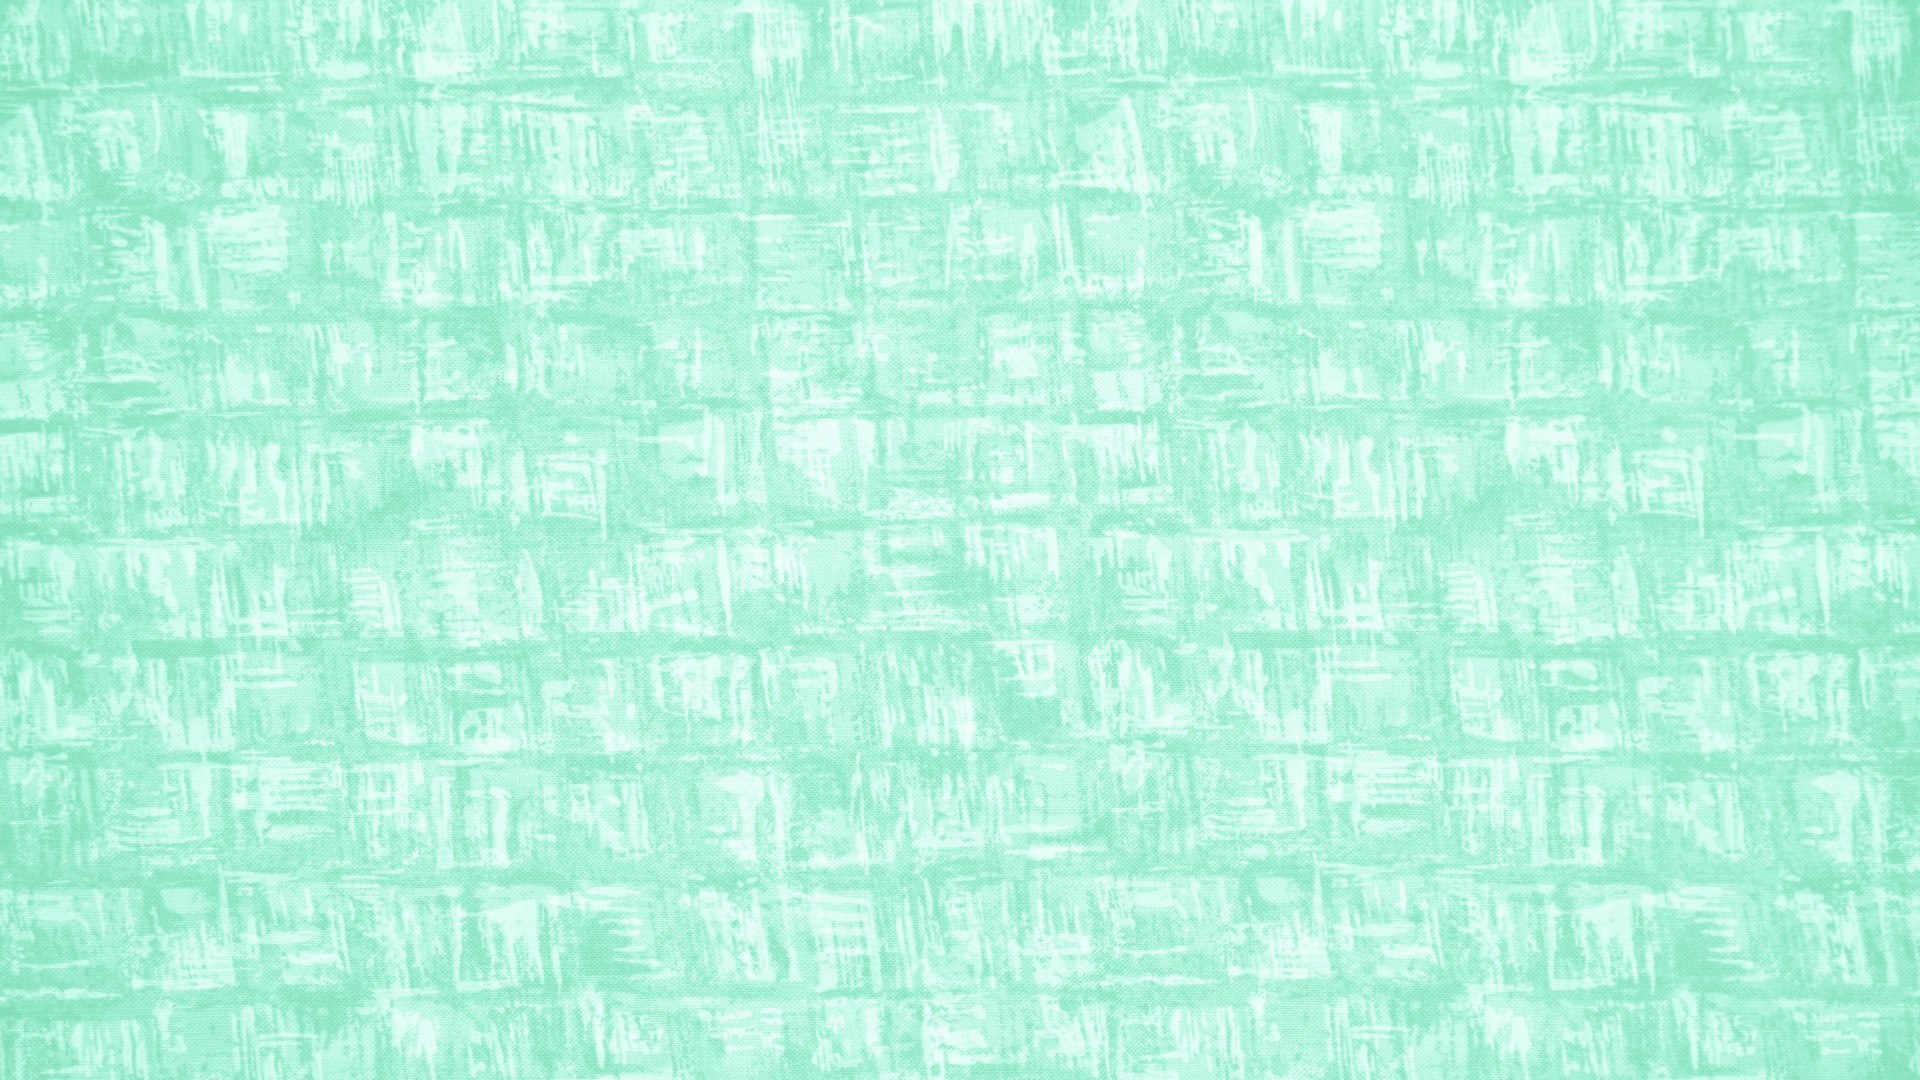 Mint Green HD Wallpaper with image resolution 1920x1080 pixel. You can make this wallpaper for your Desktop Computer Backgrounds, Mac Wallpapers, Android Lock screen or iPhone Screensavers